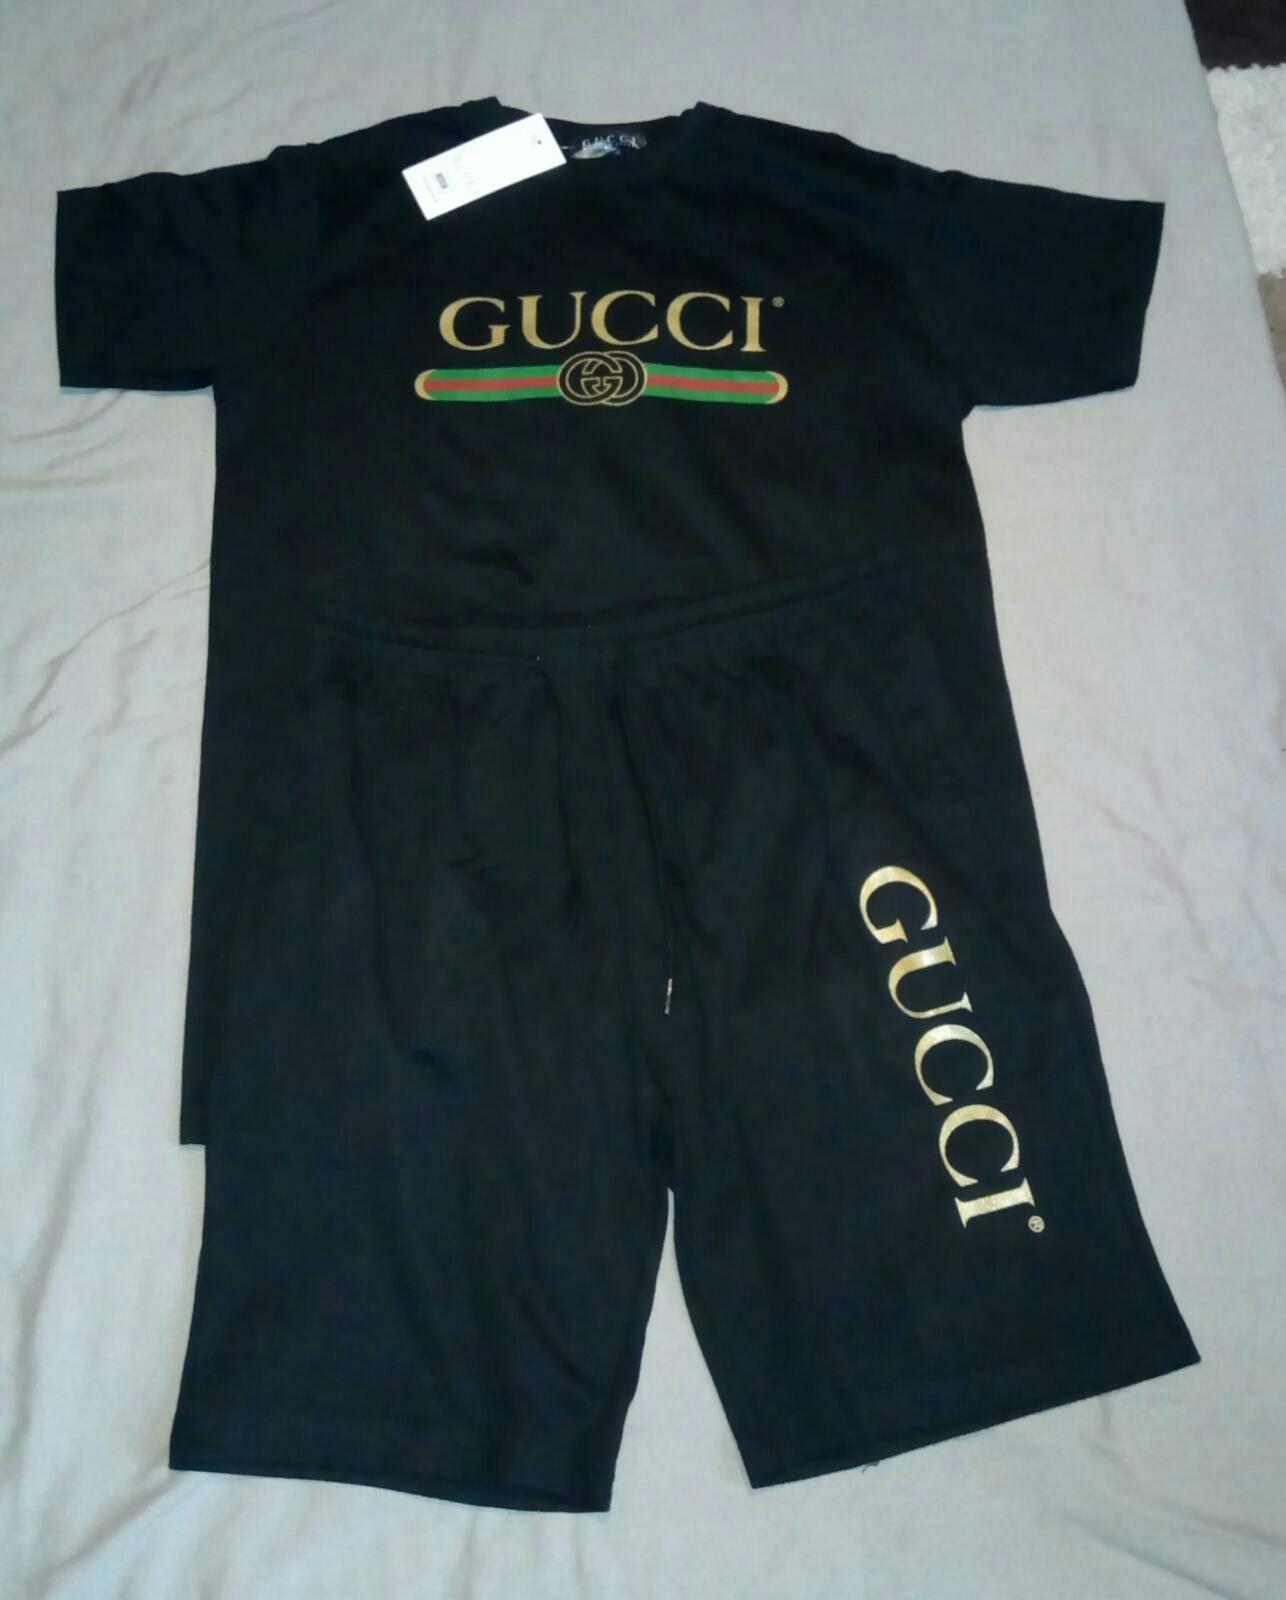 Gucci Clothes For Roblox Buyudum Cocuk Oldum - roblox girl clothes codes dresses toffee art